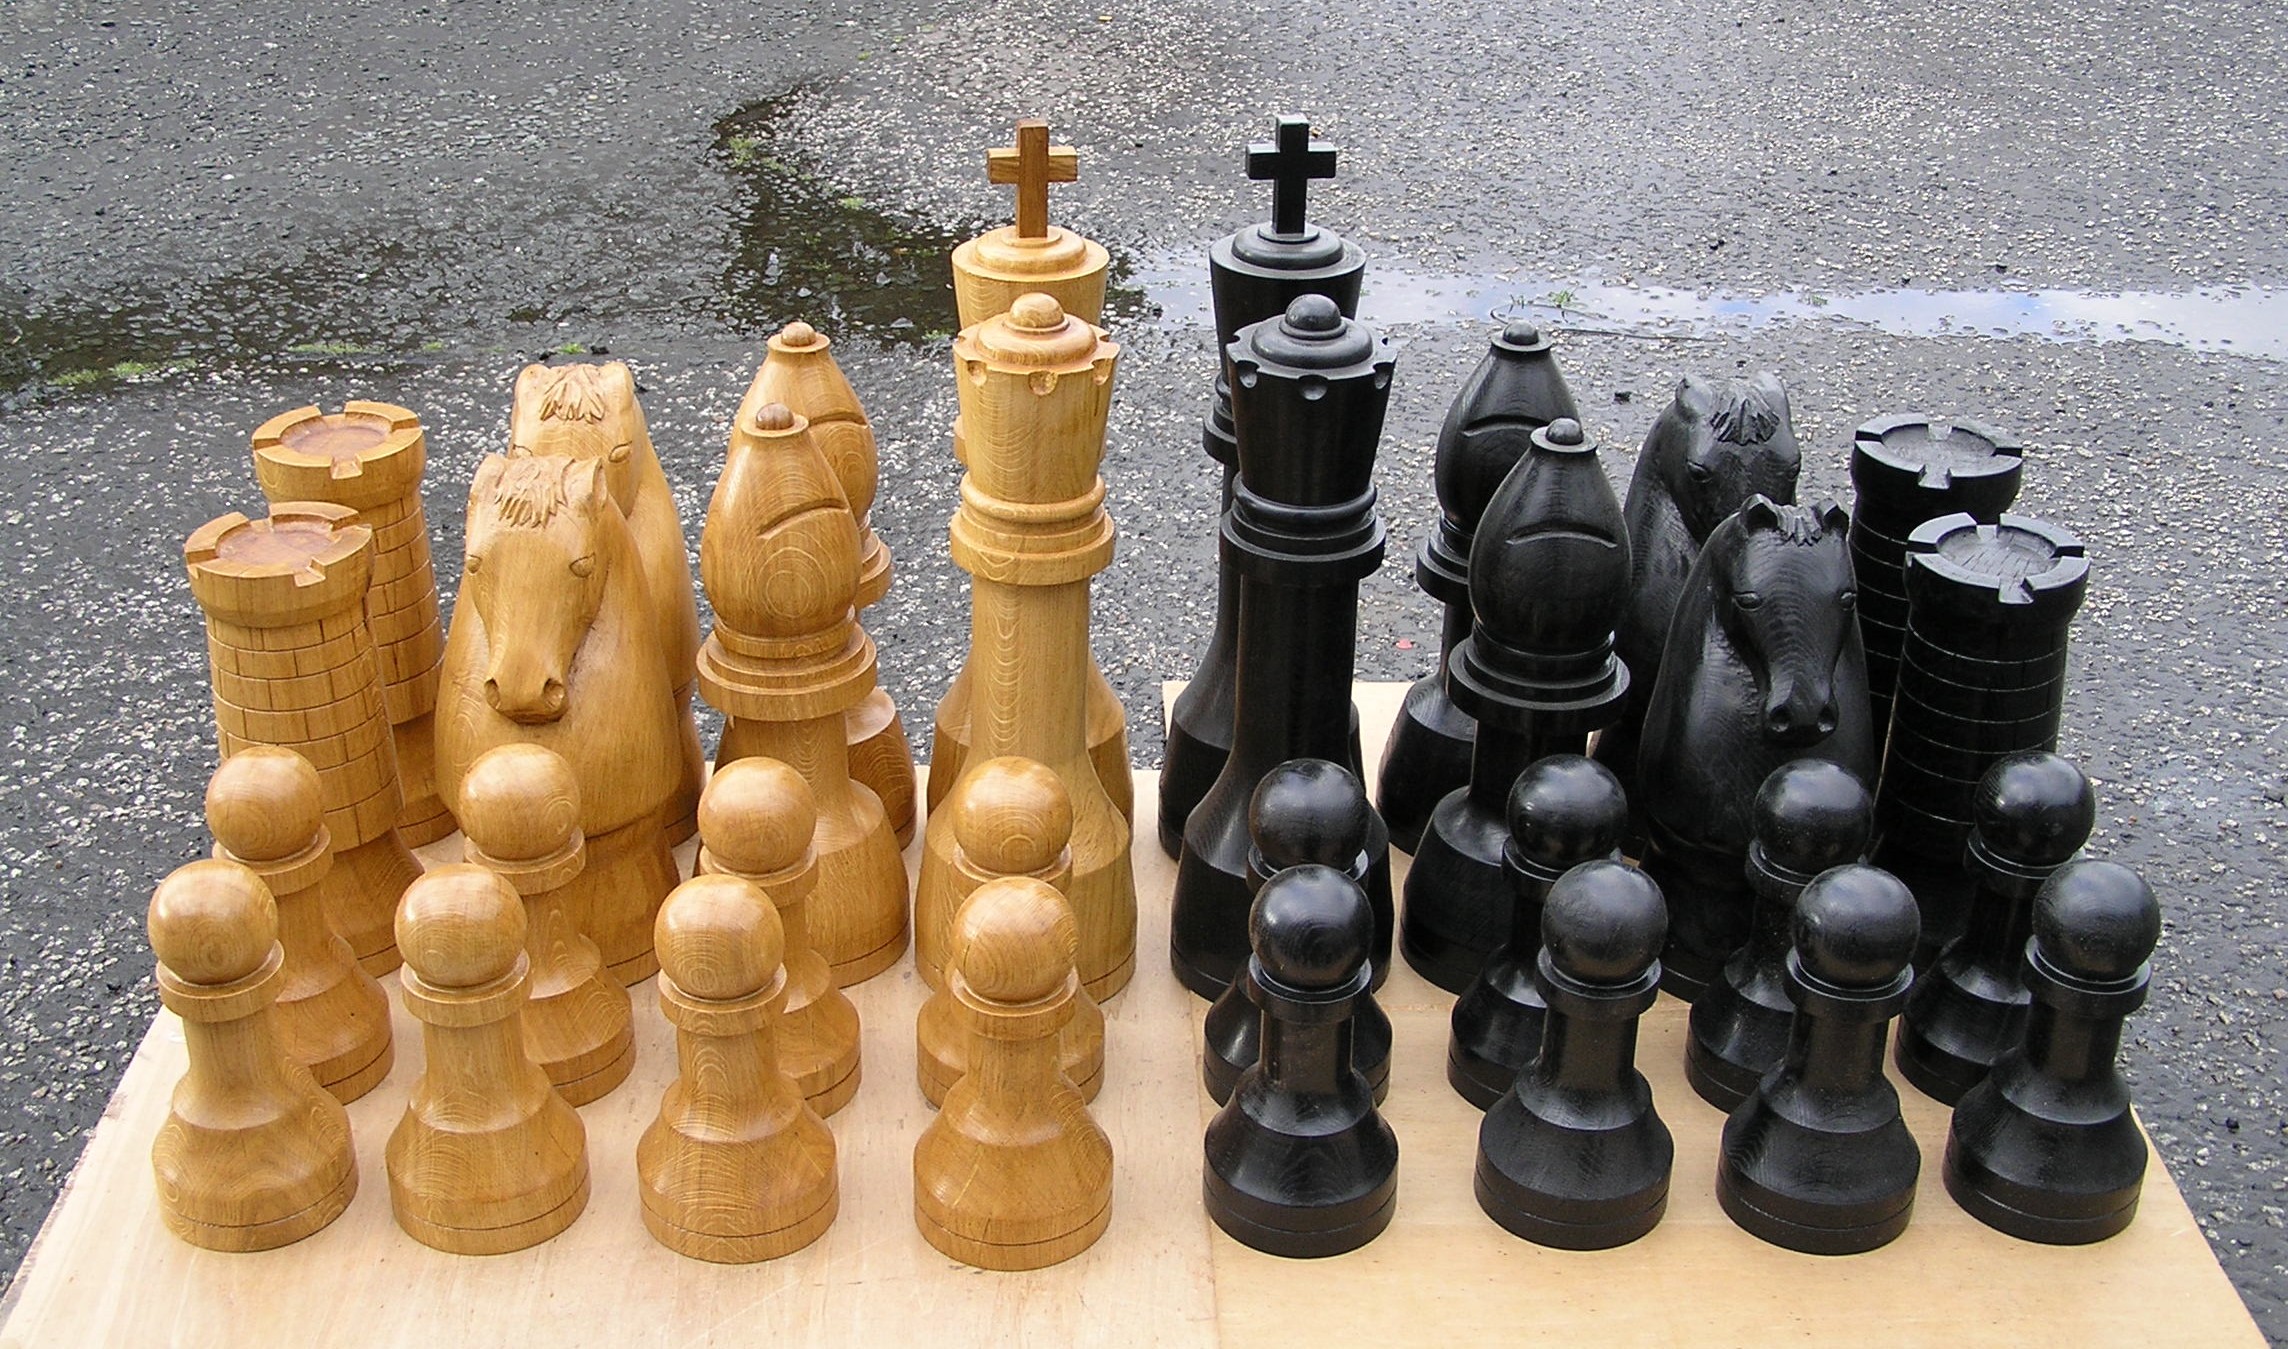 outdoor chess set, chess sets, solid oak, bespoke, custom made, oak, Scottish, traditional style, outdoor chess,